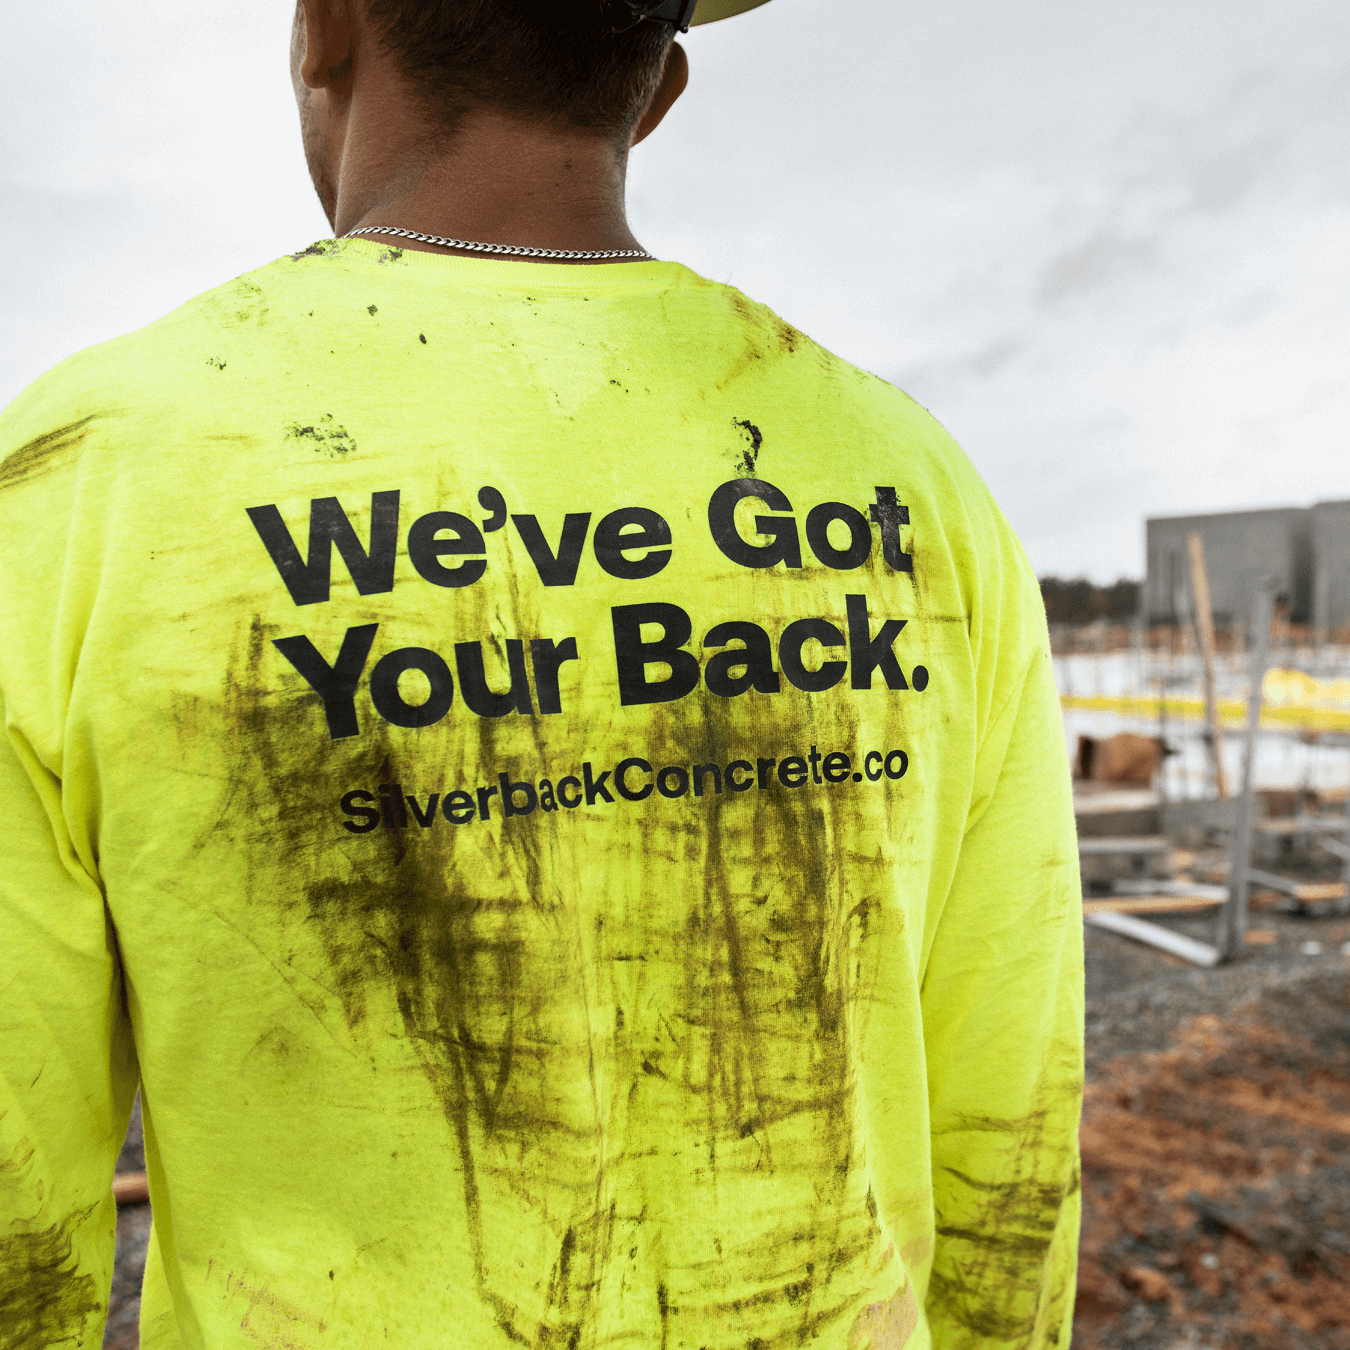 Branded company shirts for contractor; Silverback Concrete.